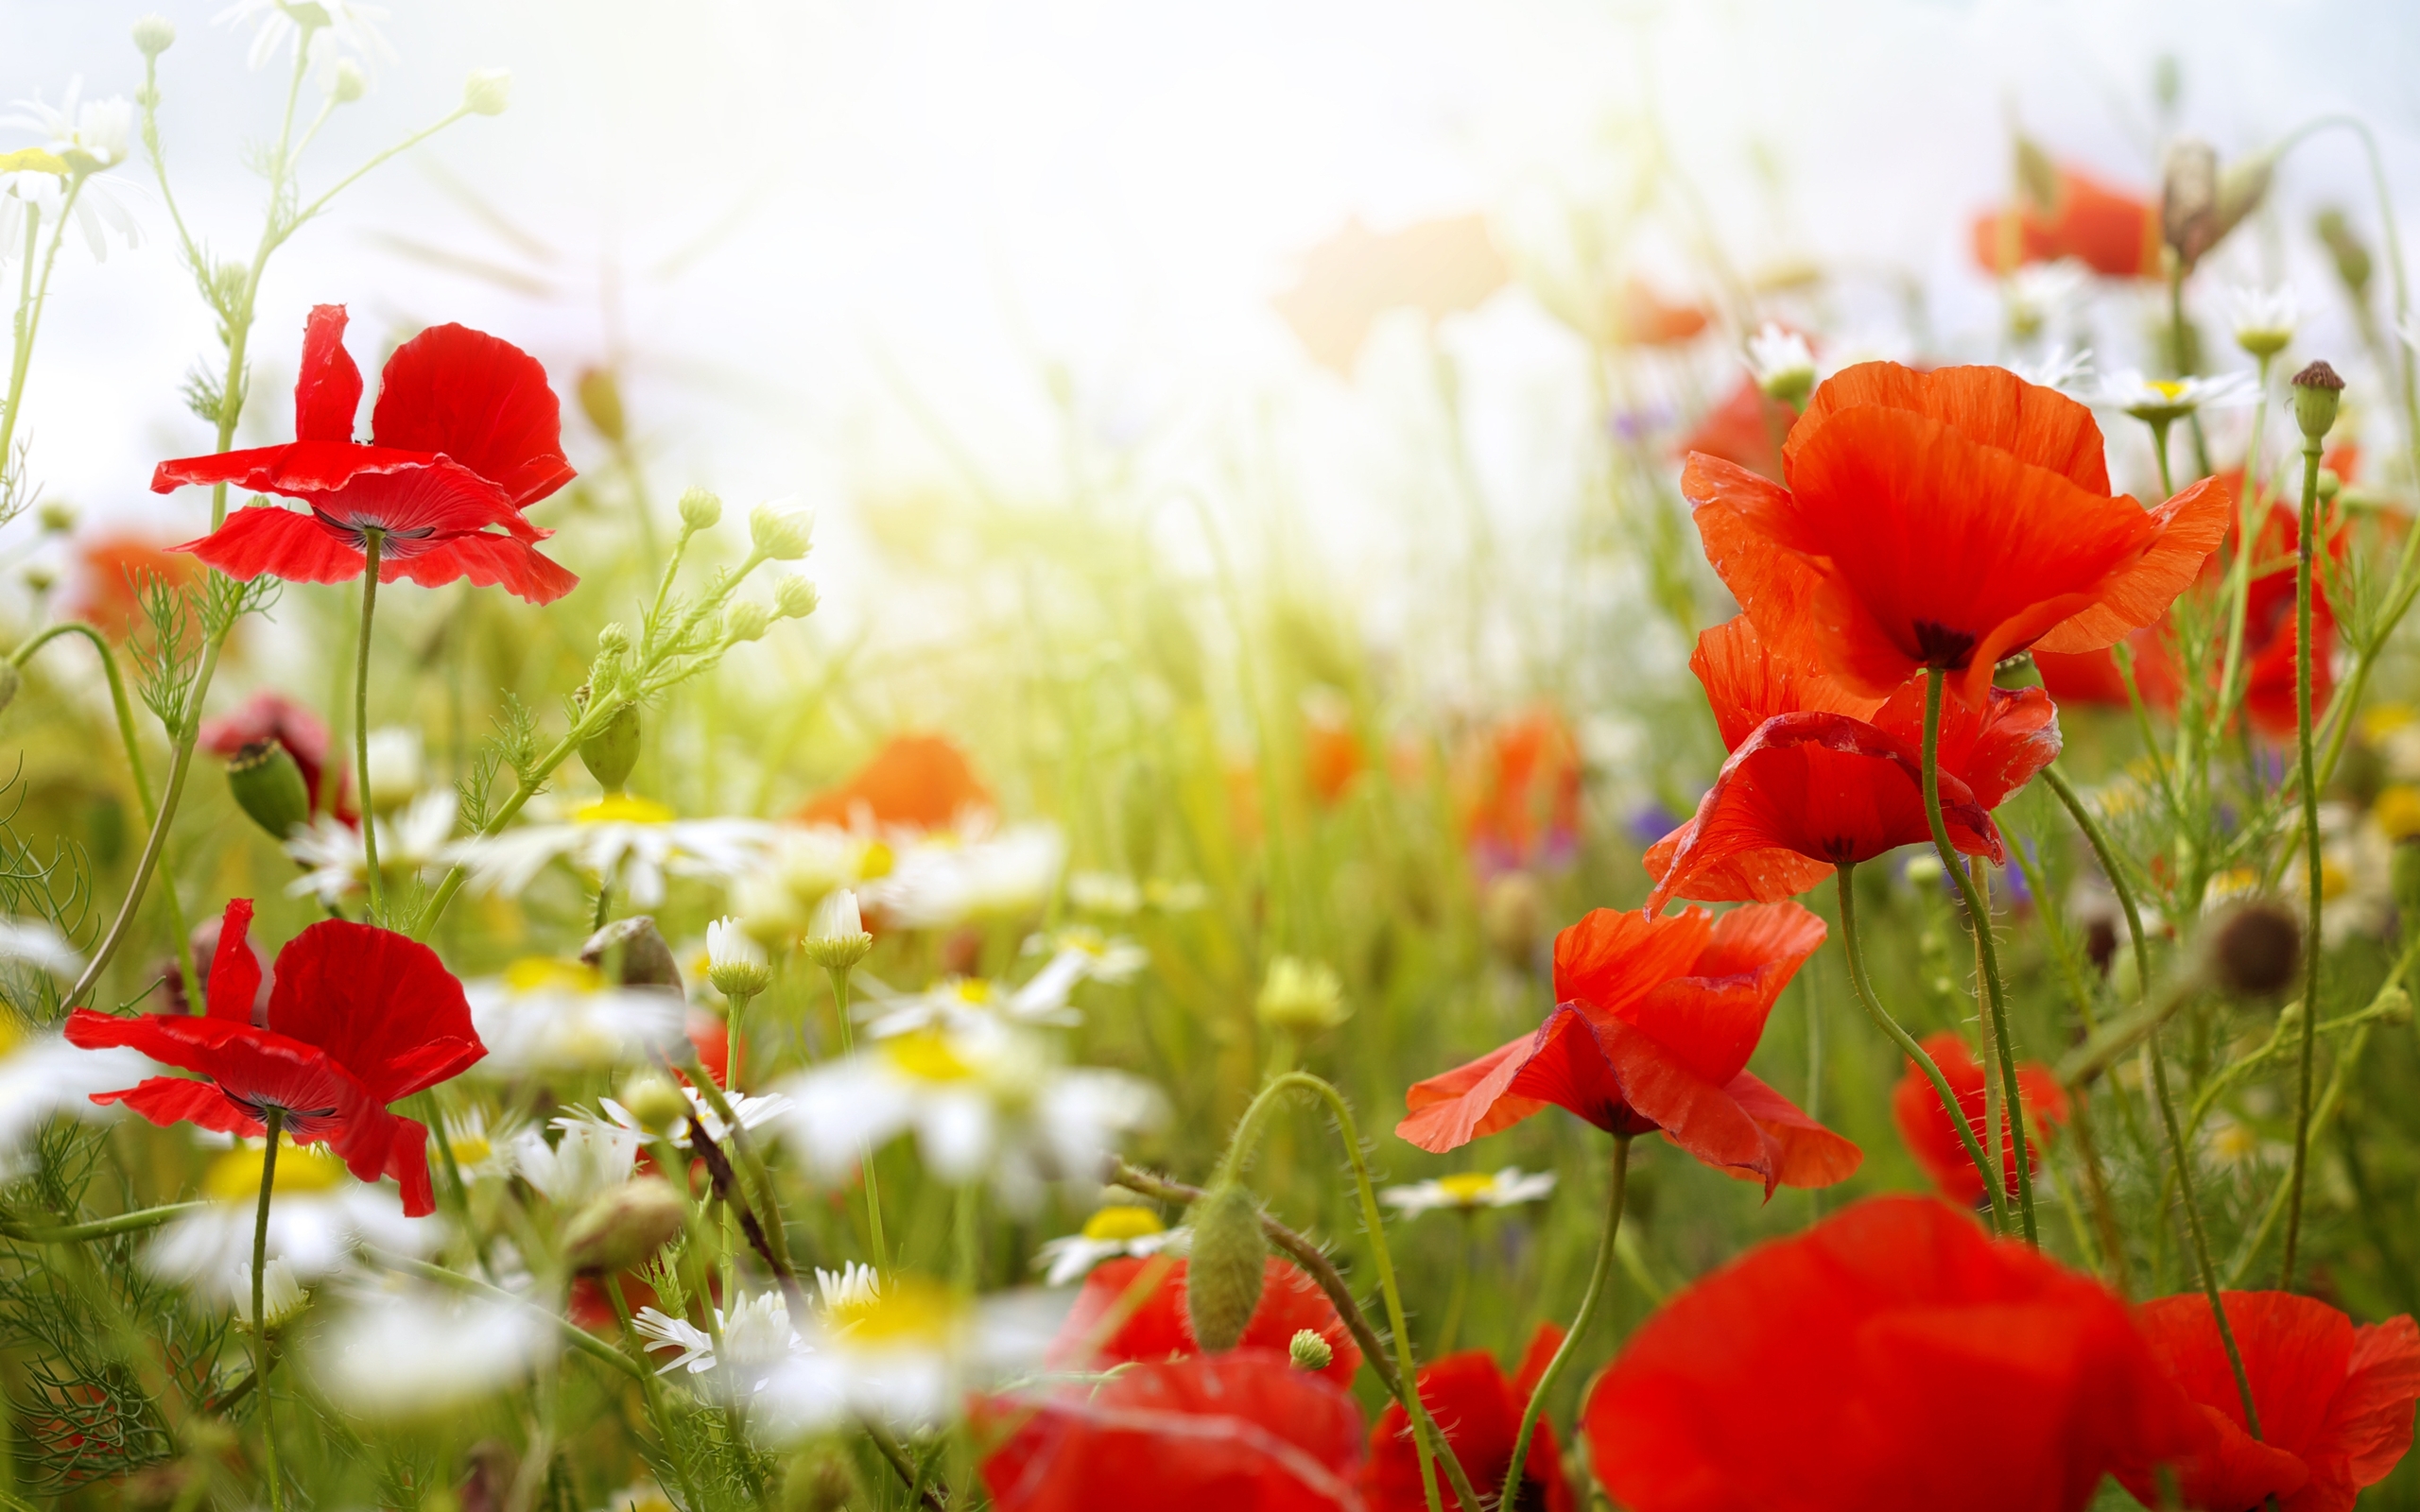 Colorful Poppy Flowers Wallpapers   2560x1600   1946625 2560x1600